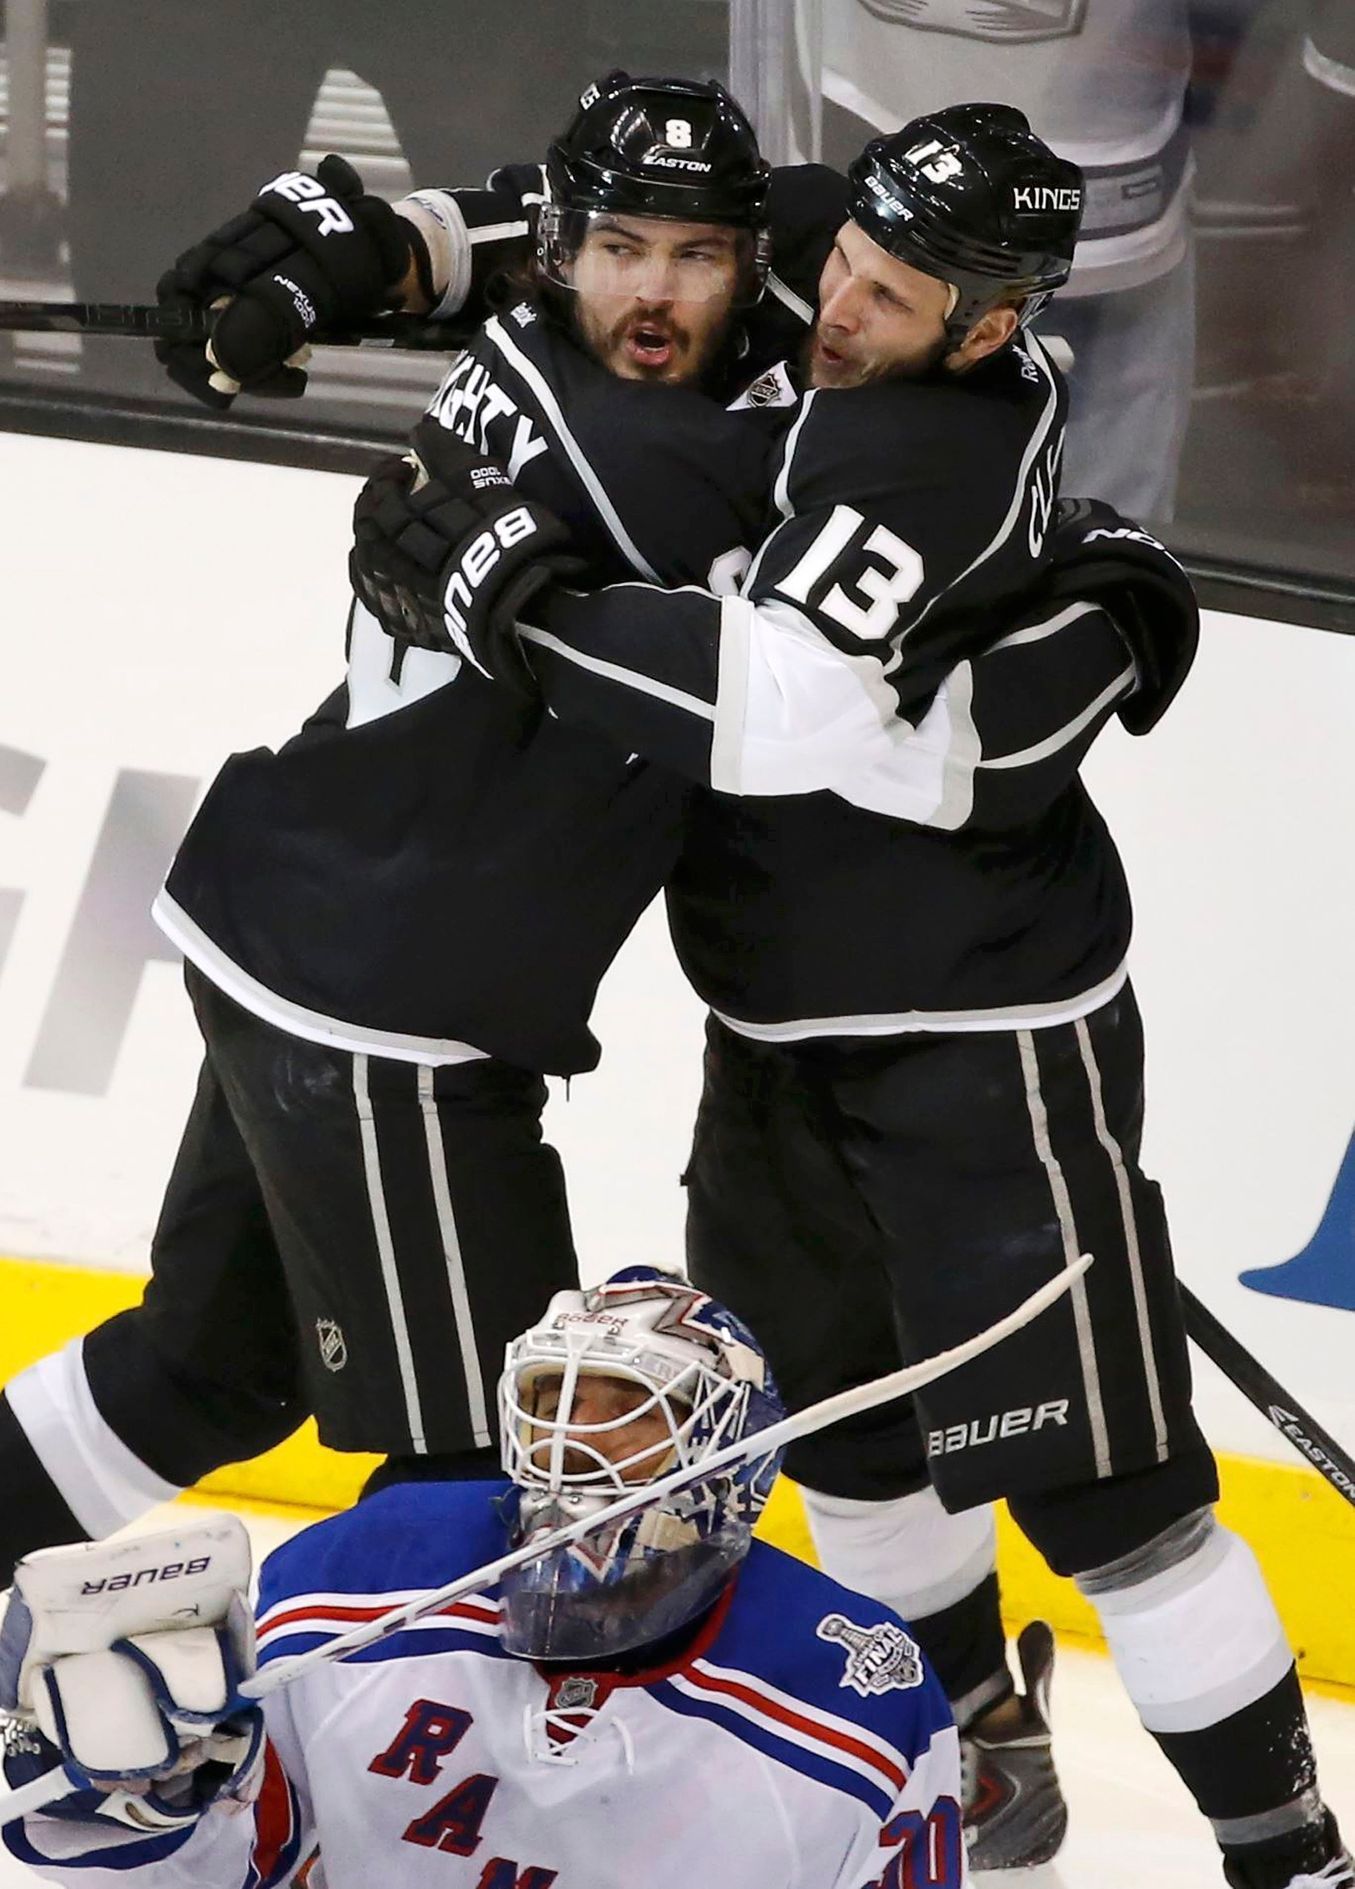 Kings' Doughty celebrates his goal on Rangers goalie Lundqvist with teammate Clifford during the second period in Game 1 of their NHL Stanley Cup Finals hockey series in Los Angeles